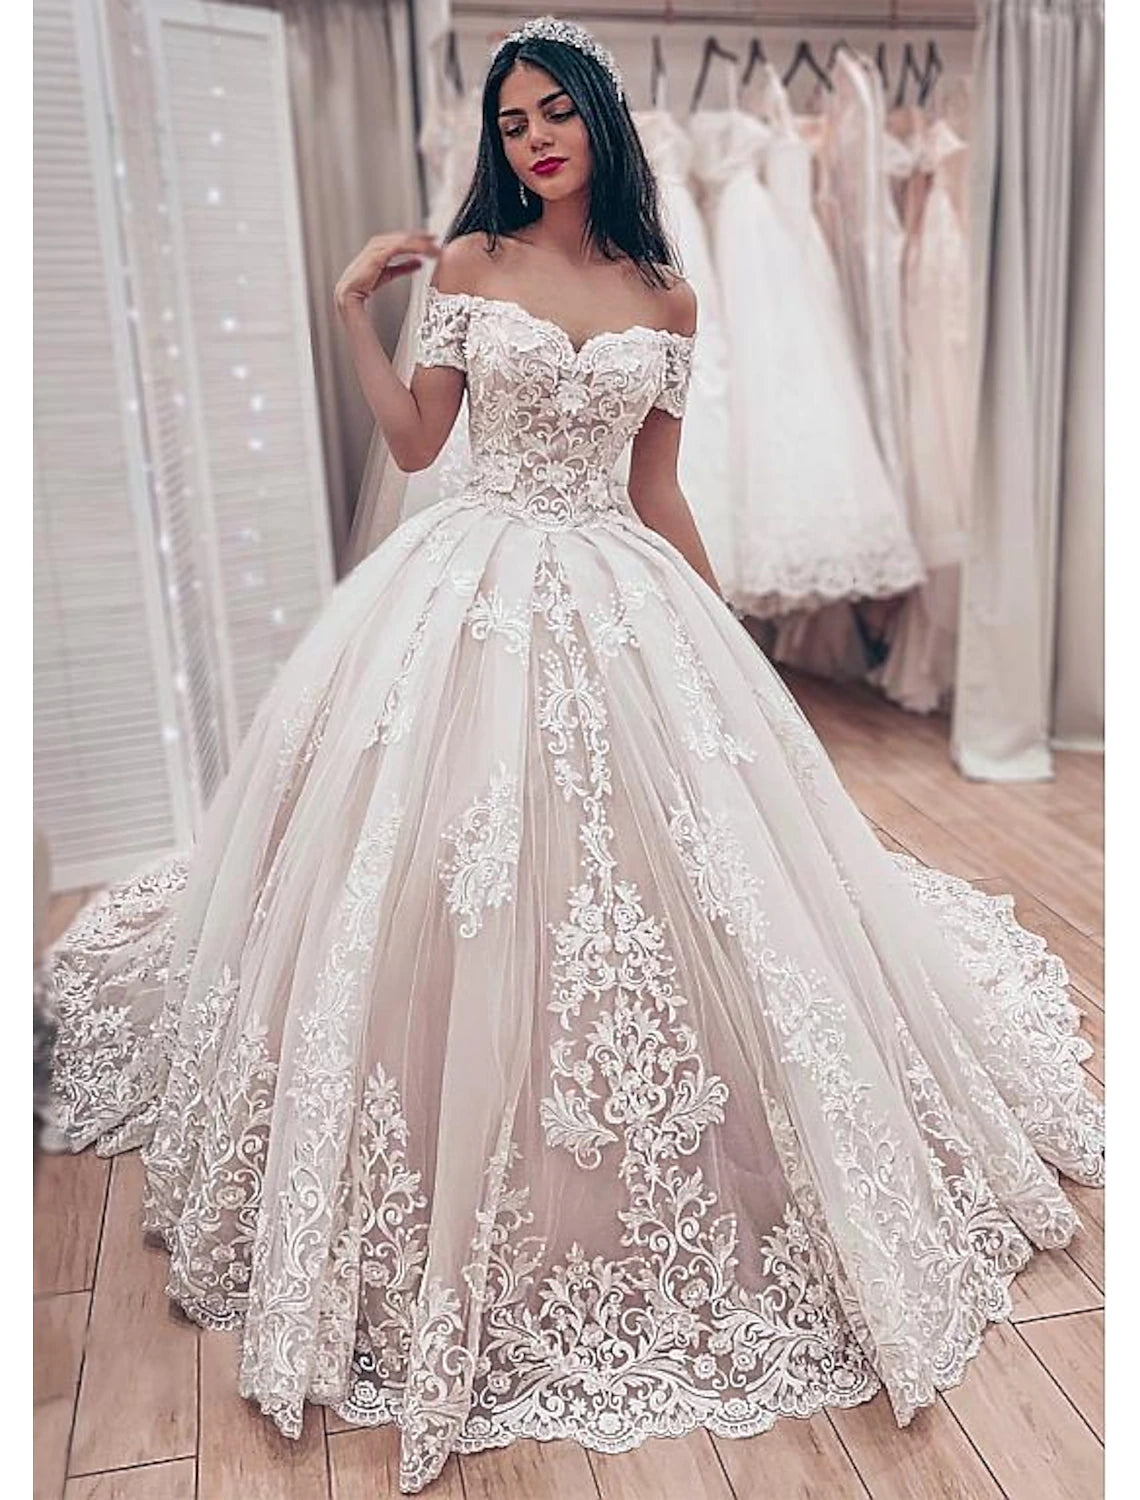 wholesale  Engagement Formal Fall Wedding Dresses Ball Gown Off Shoulder Cap Sleeve Chapel Train Lace Bridal Gowns With Pleats Appliques